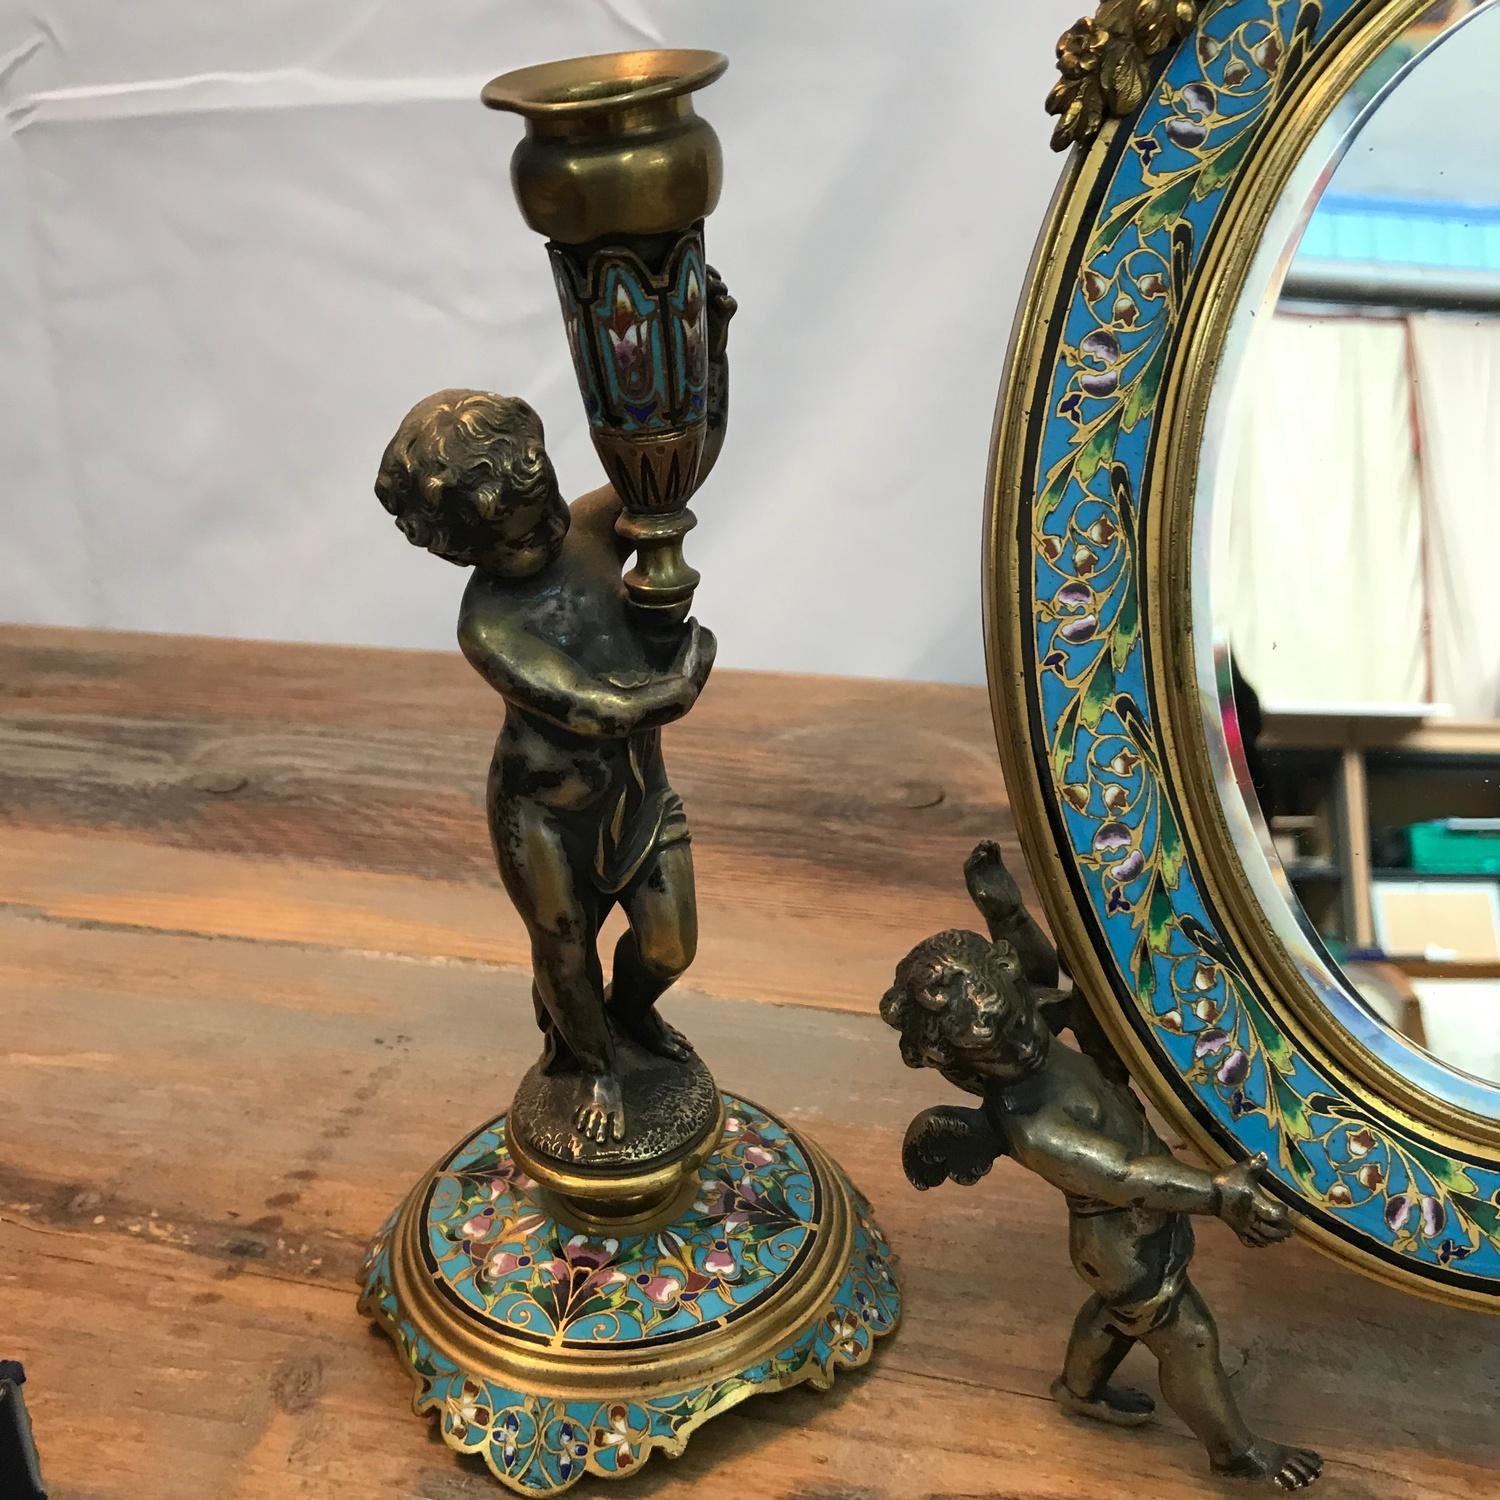 A Victorian French gilt bronze and enamel cloisonne dressing table mirror with matching candle - Image 2 of 8